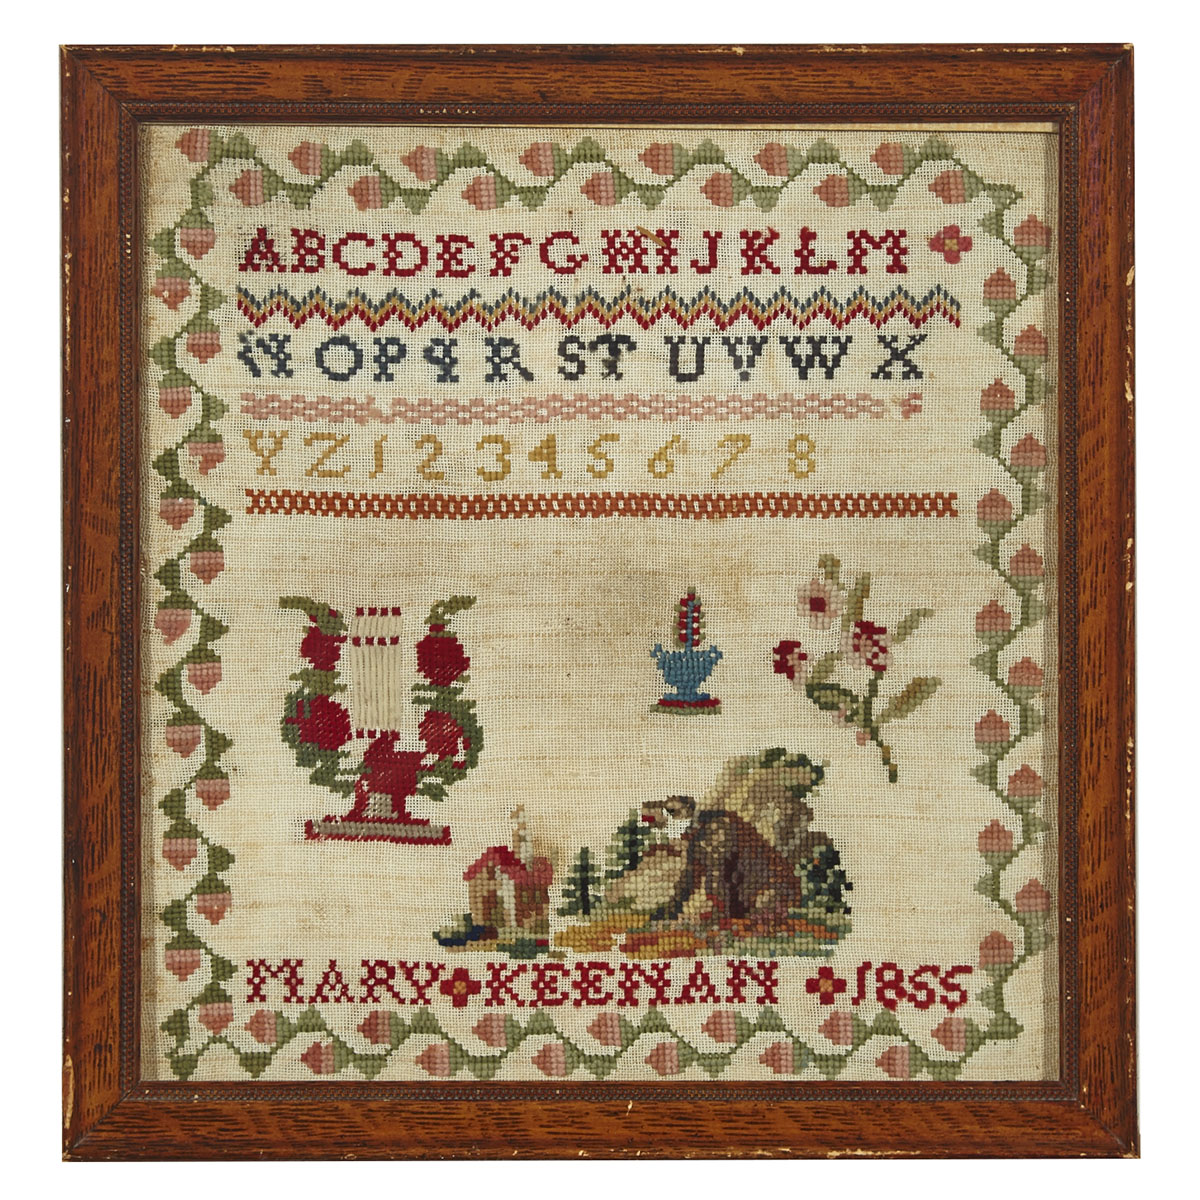 Victorian Alphabet and Pictorial Sampler, Mary Keenan, 1855